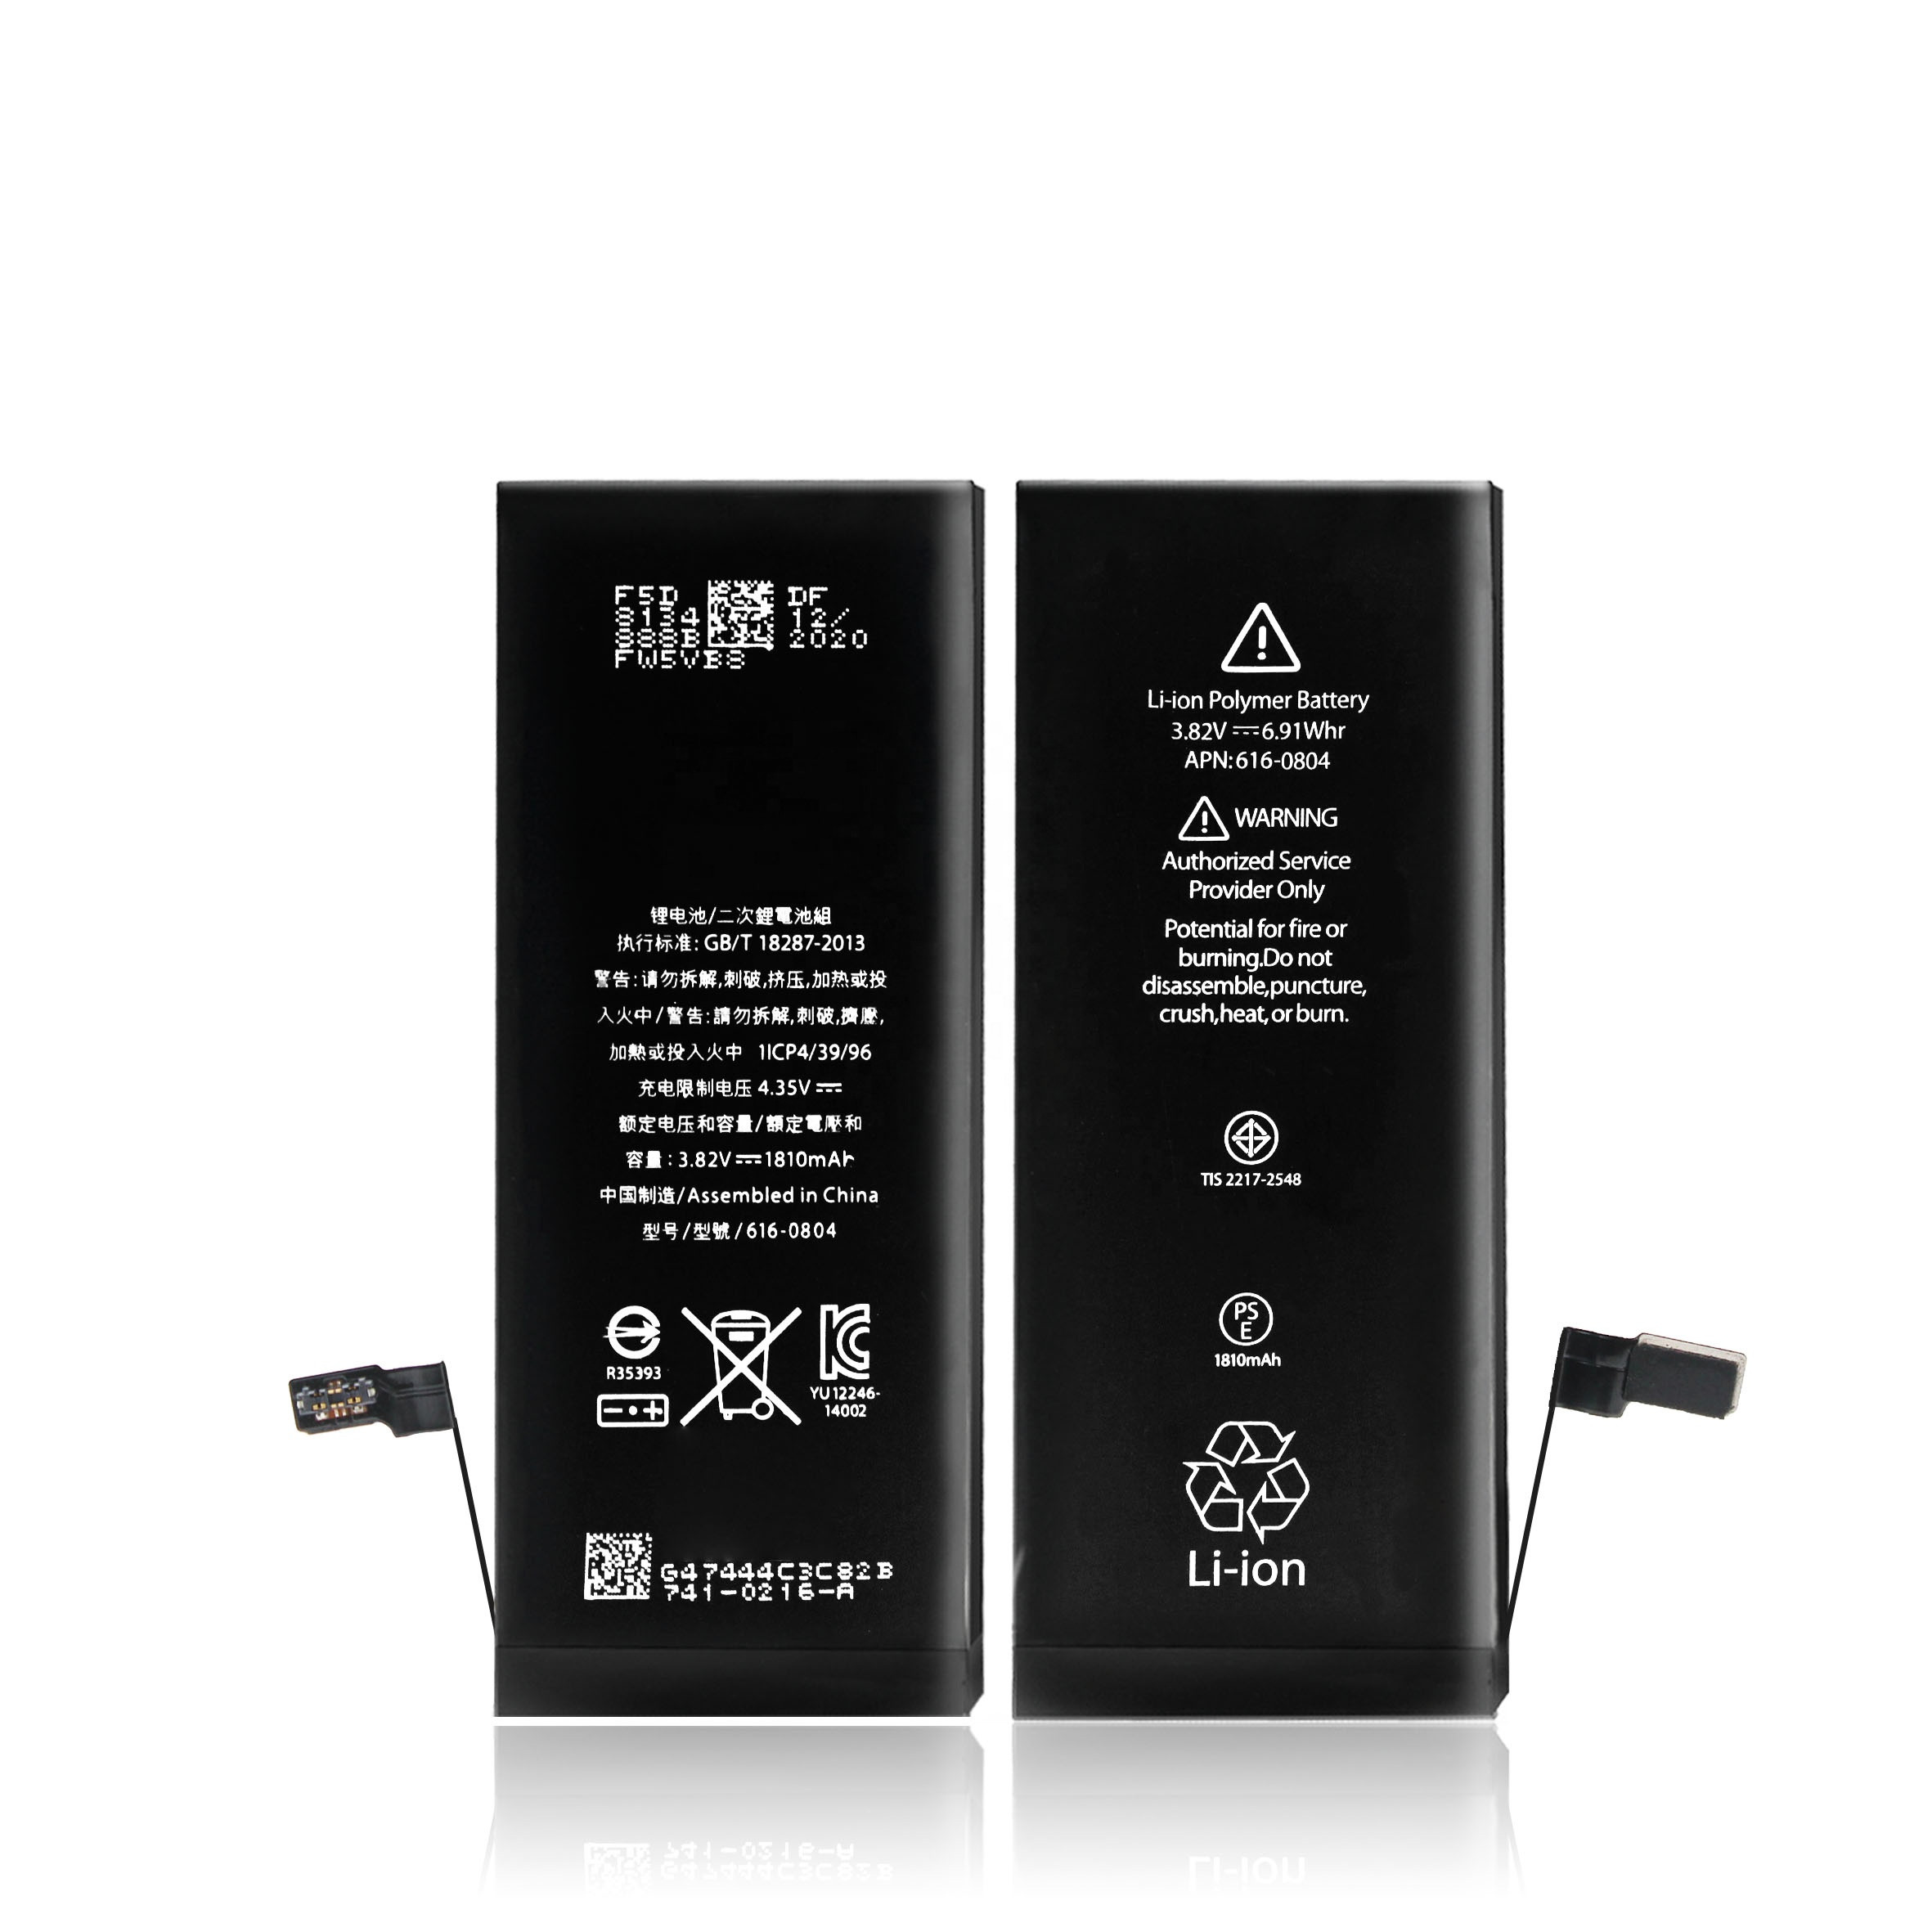 Iphone 6G battery